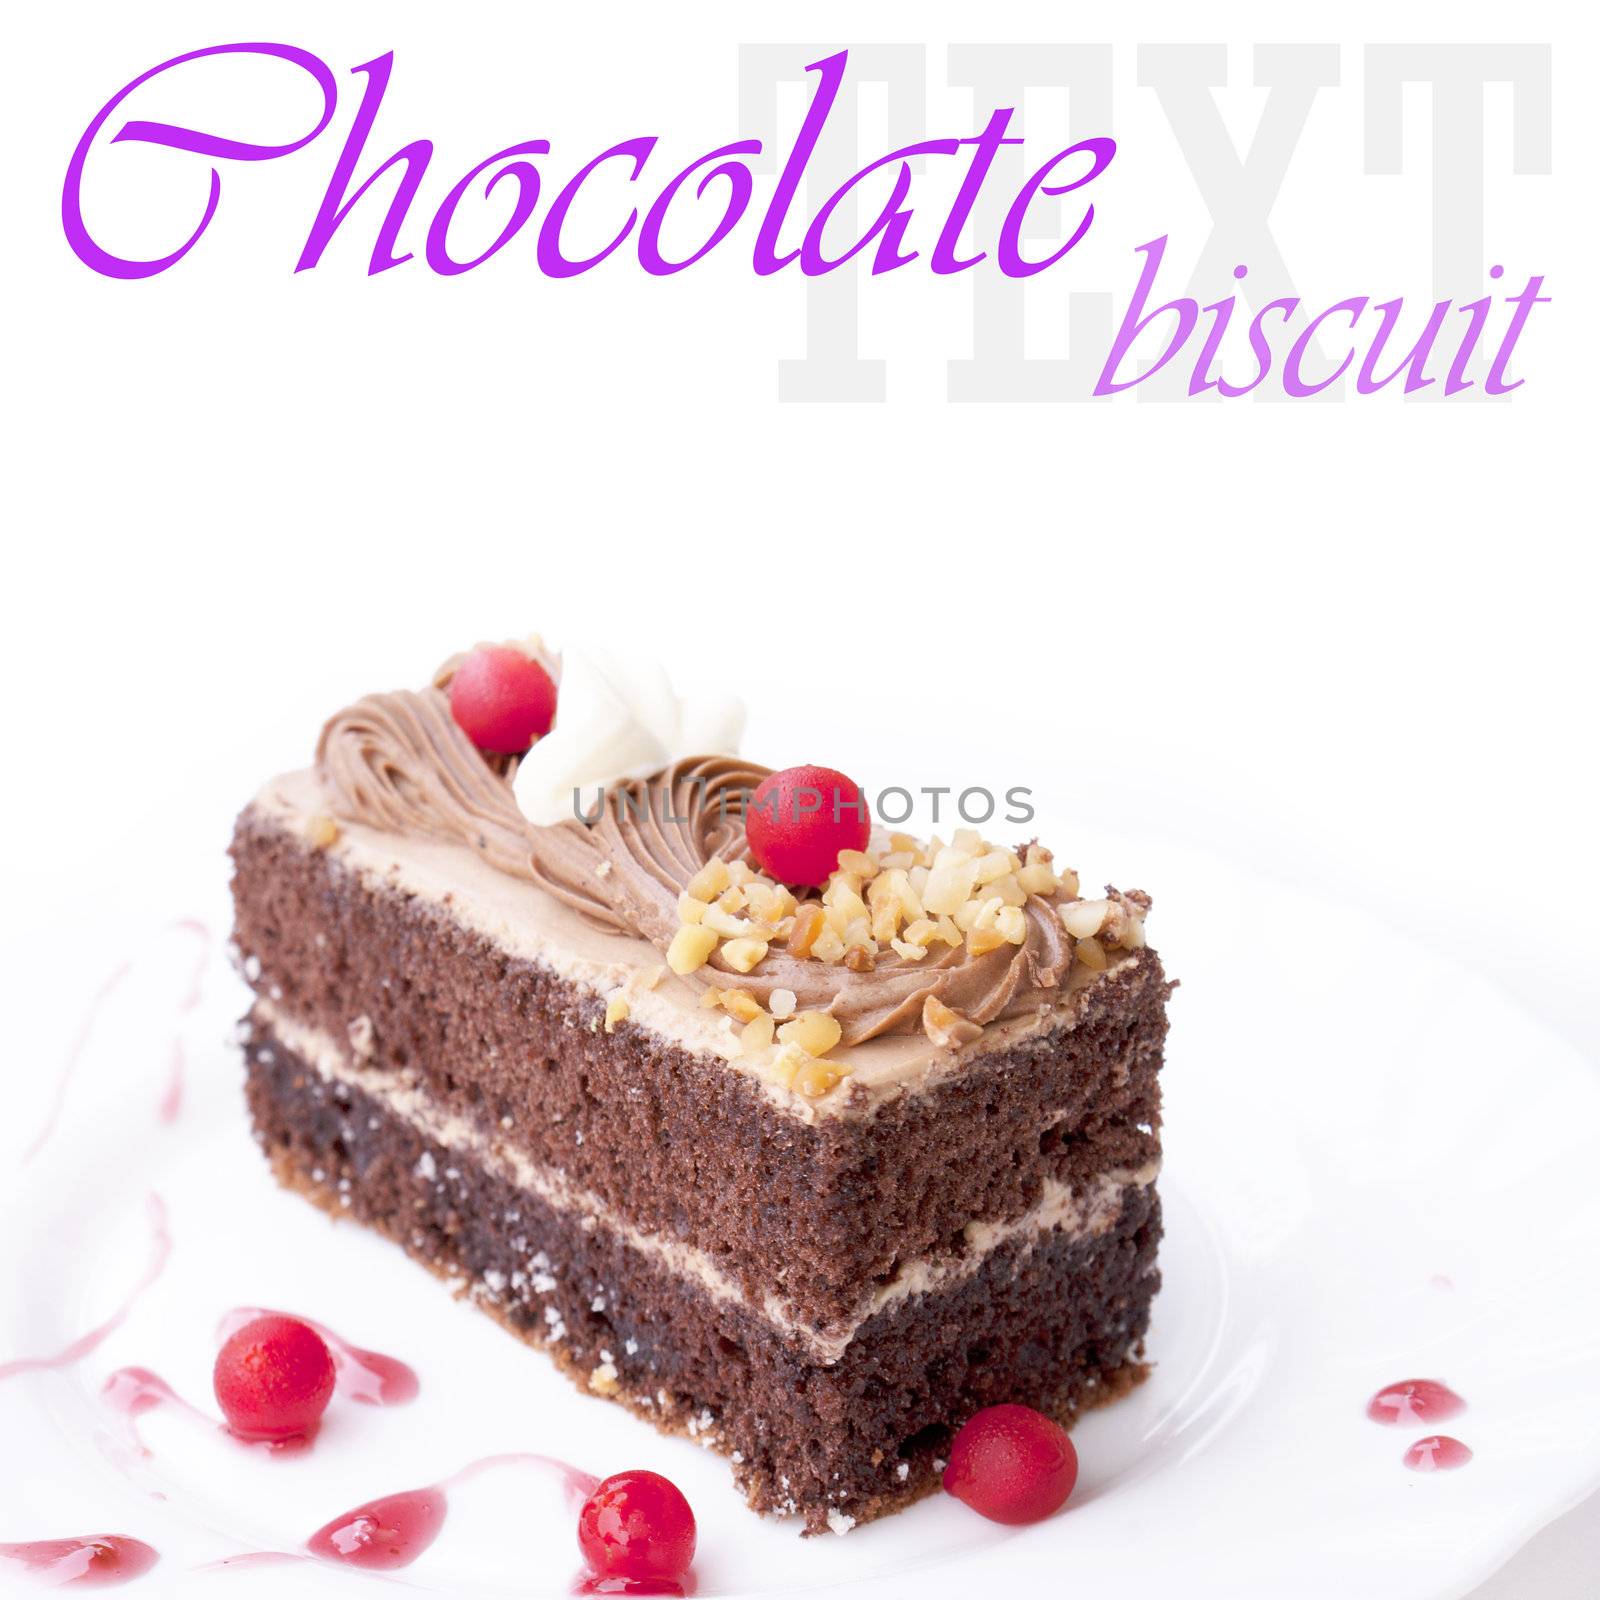 Sweet chocolate biscuit with fresh cherry